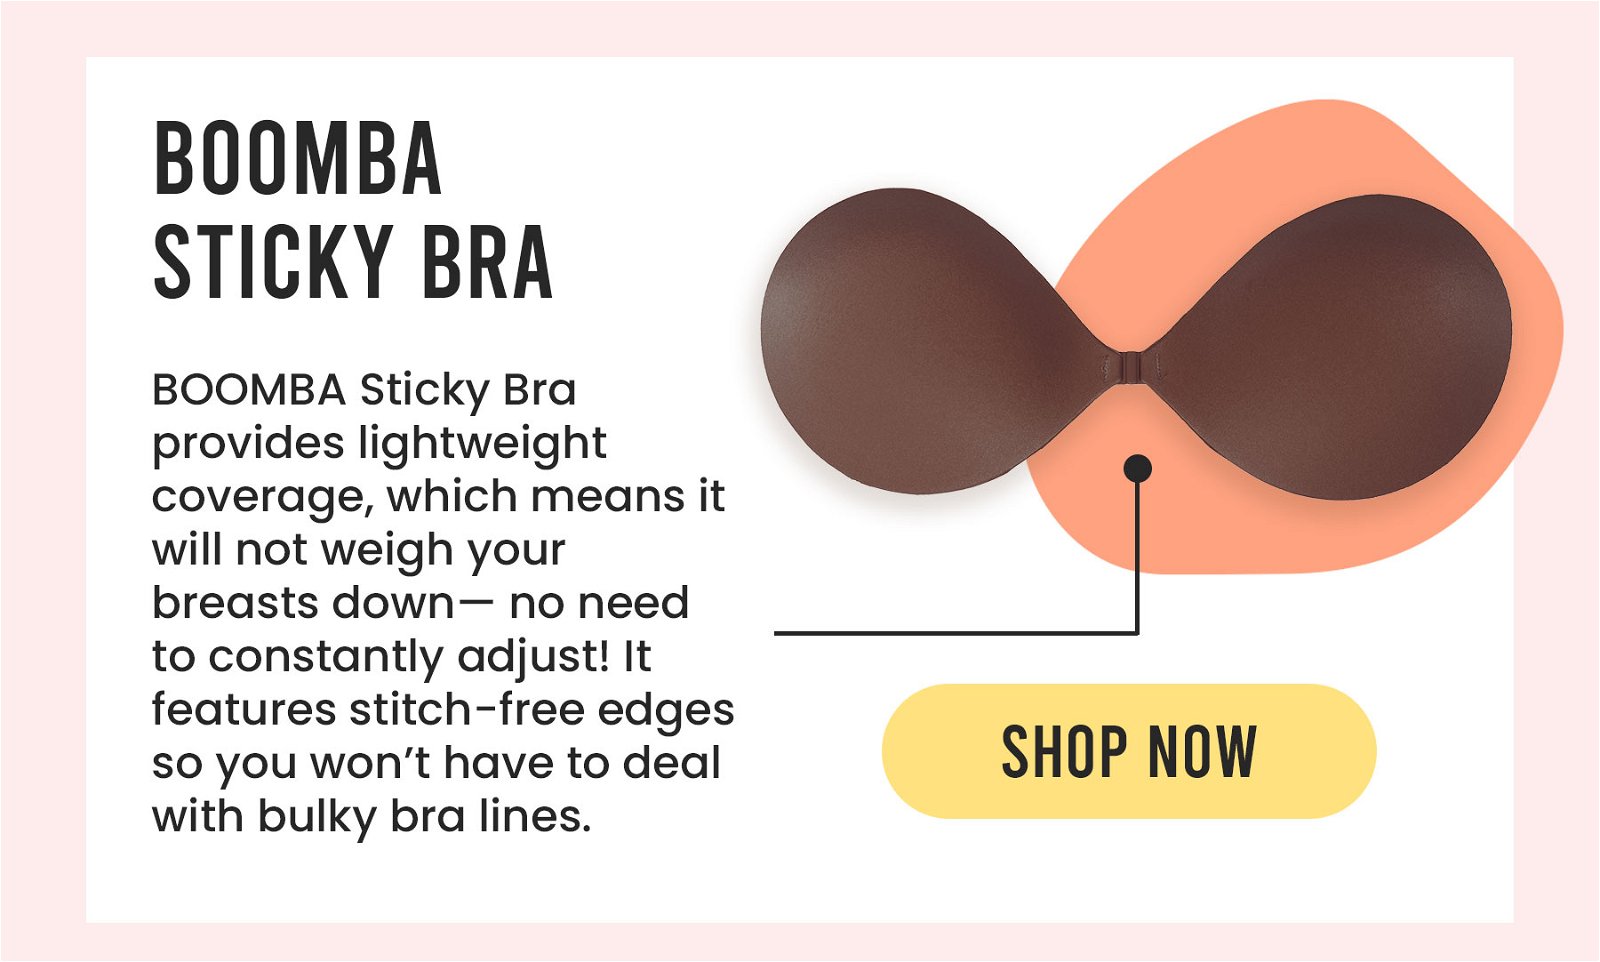 BOOMBA: Whats the deal with BOOMBA Bras?